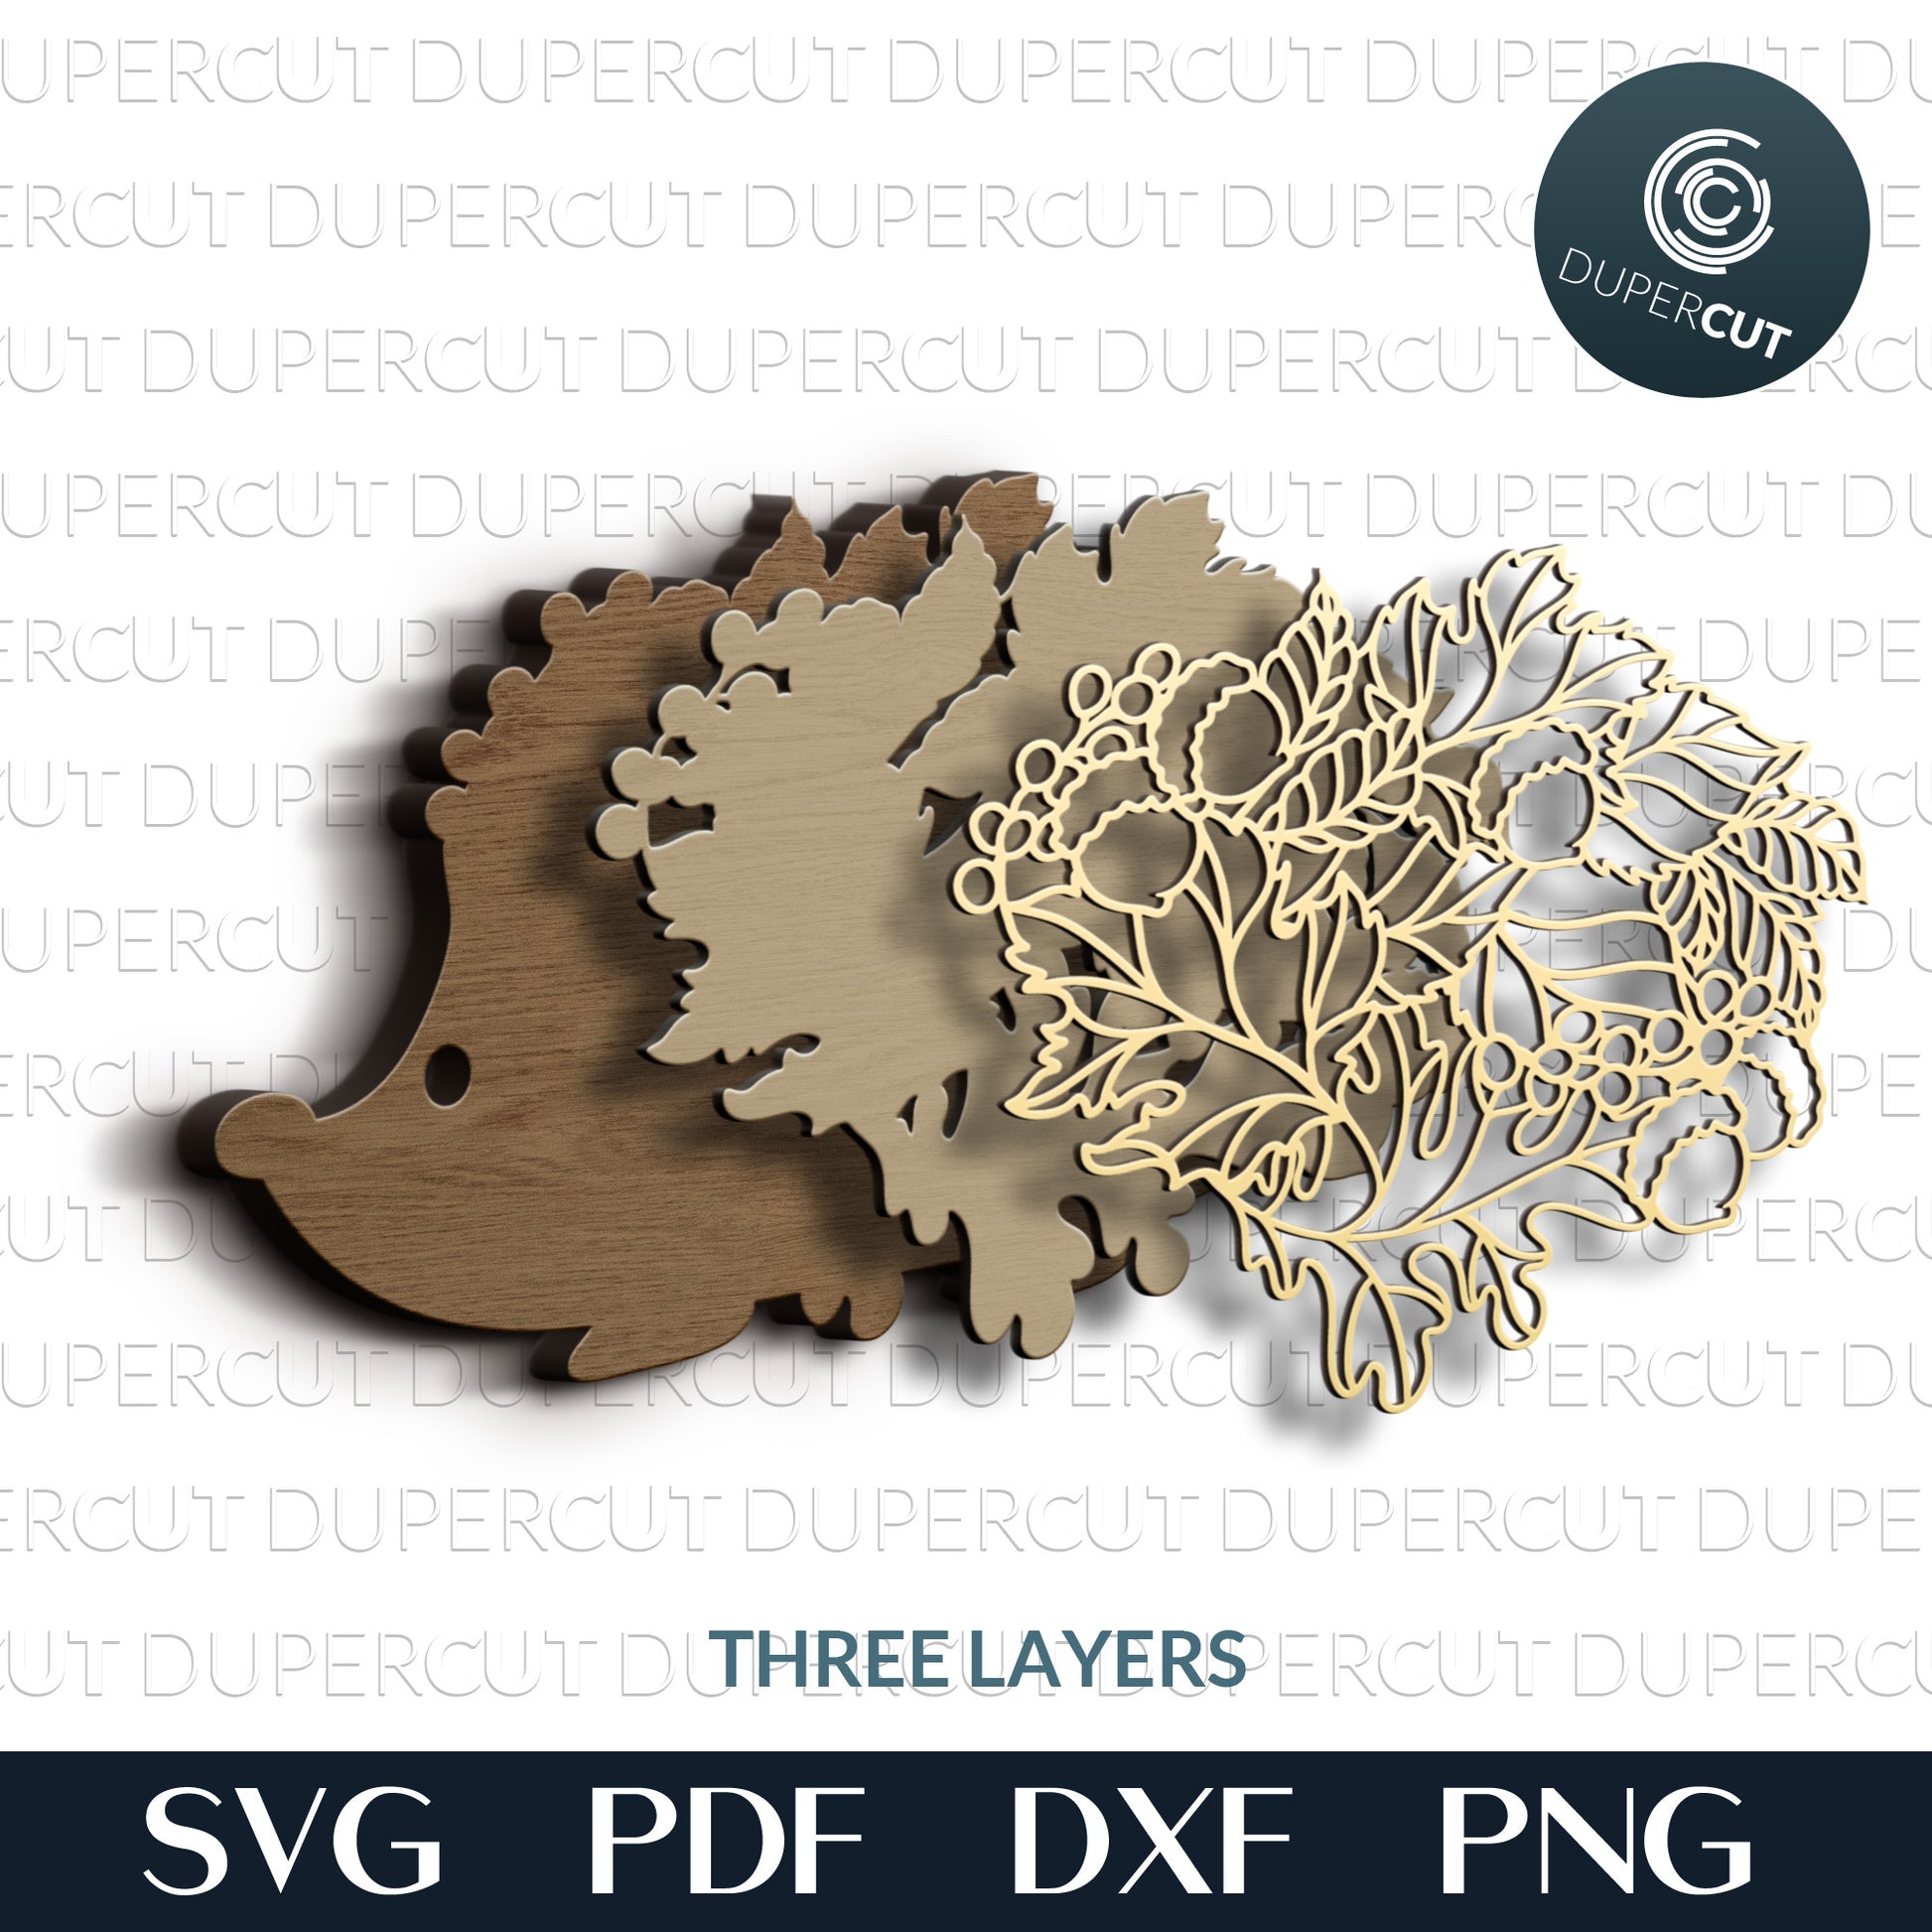 Abstract cute hedgehog - layered cut files SVG PDF DXF template for Glowforge, Cricut, Silhouette cameo, CNC plasma machines